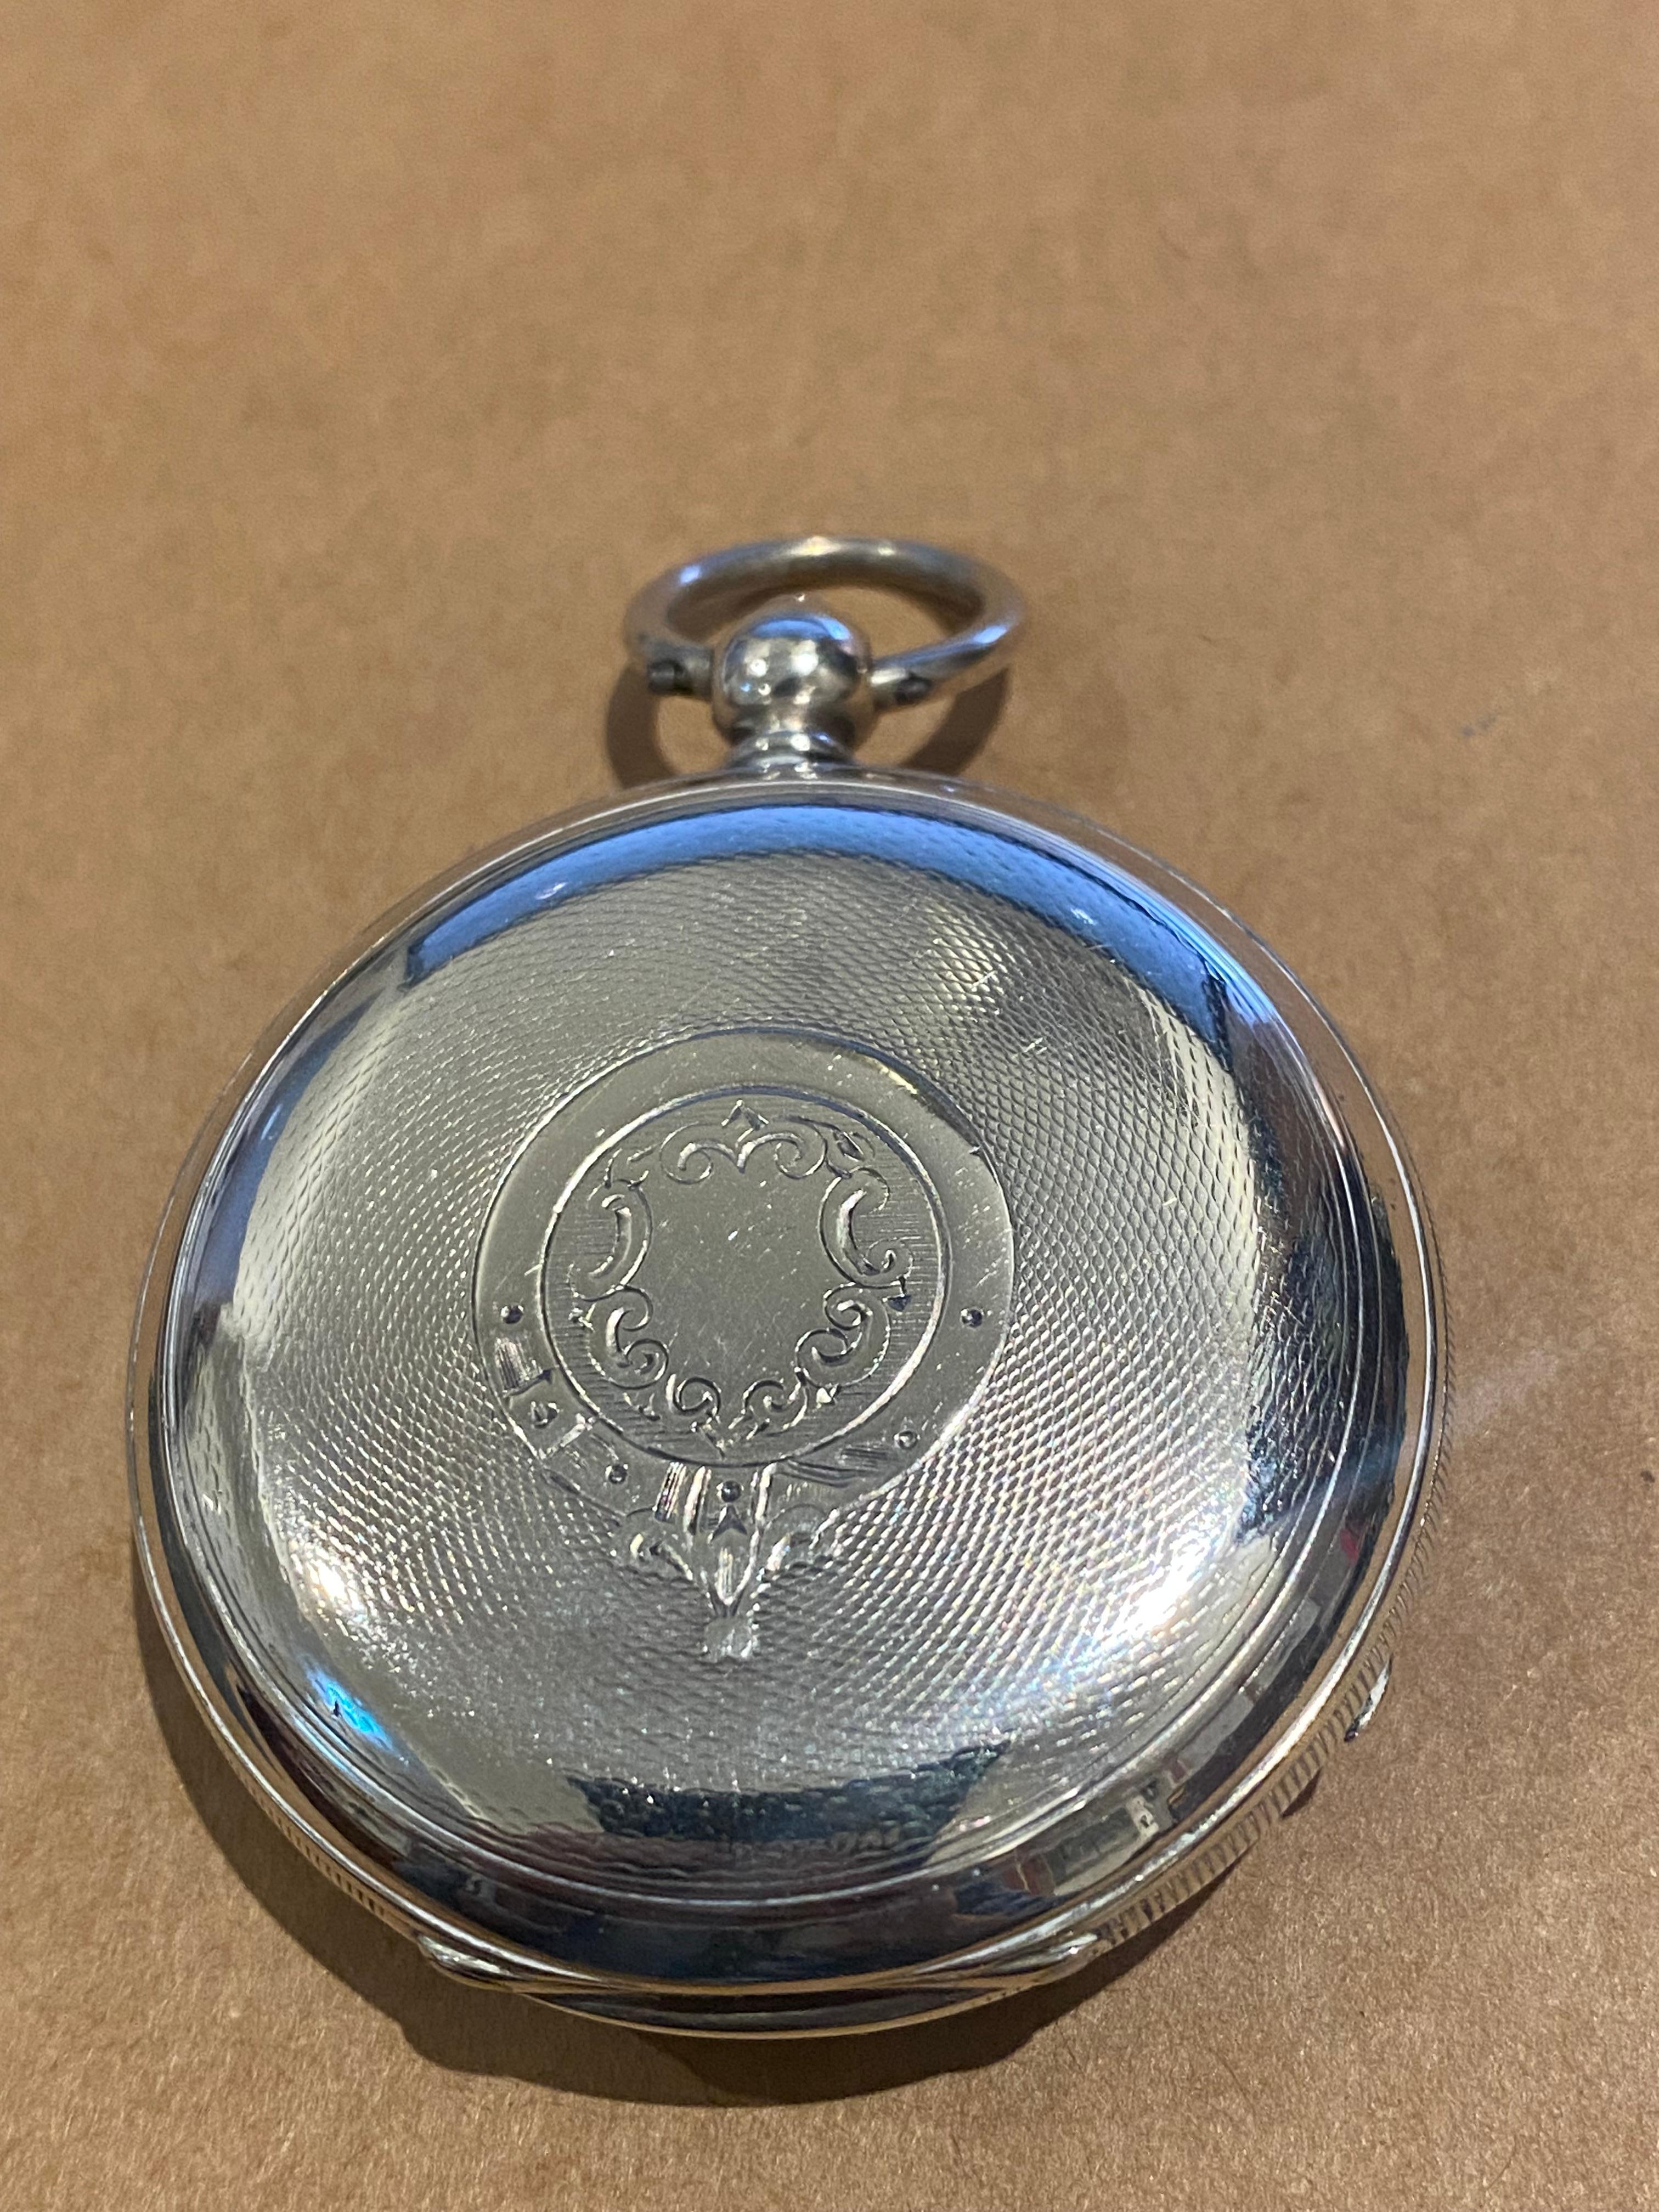 Antique 925 Sterling Silver OpenFace 48mm Pocket Watch

dates back to circa 1882

Despite its age, its in a great vintage condition & in excellent working order 

~~~~~~

Designed as an open face, the piece is centering a white porcelain dial,